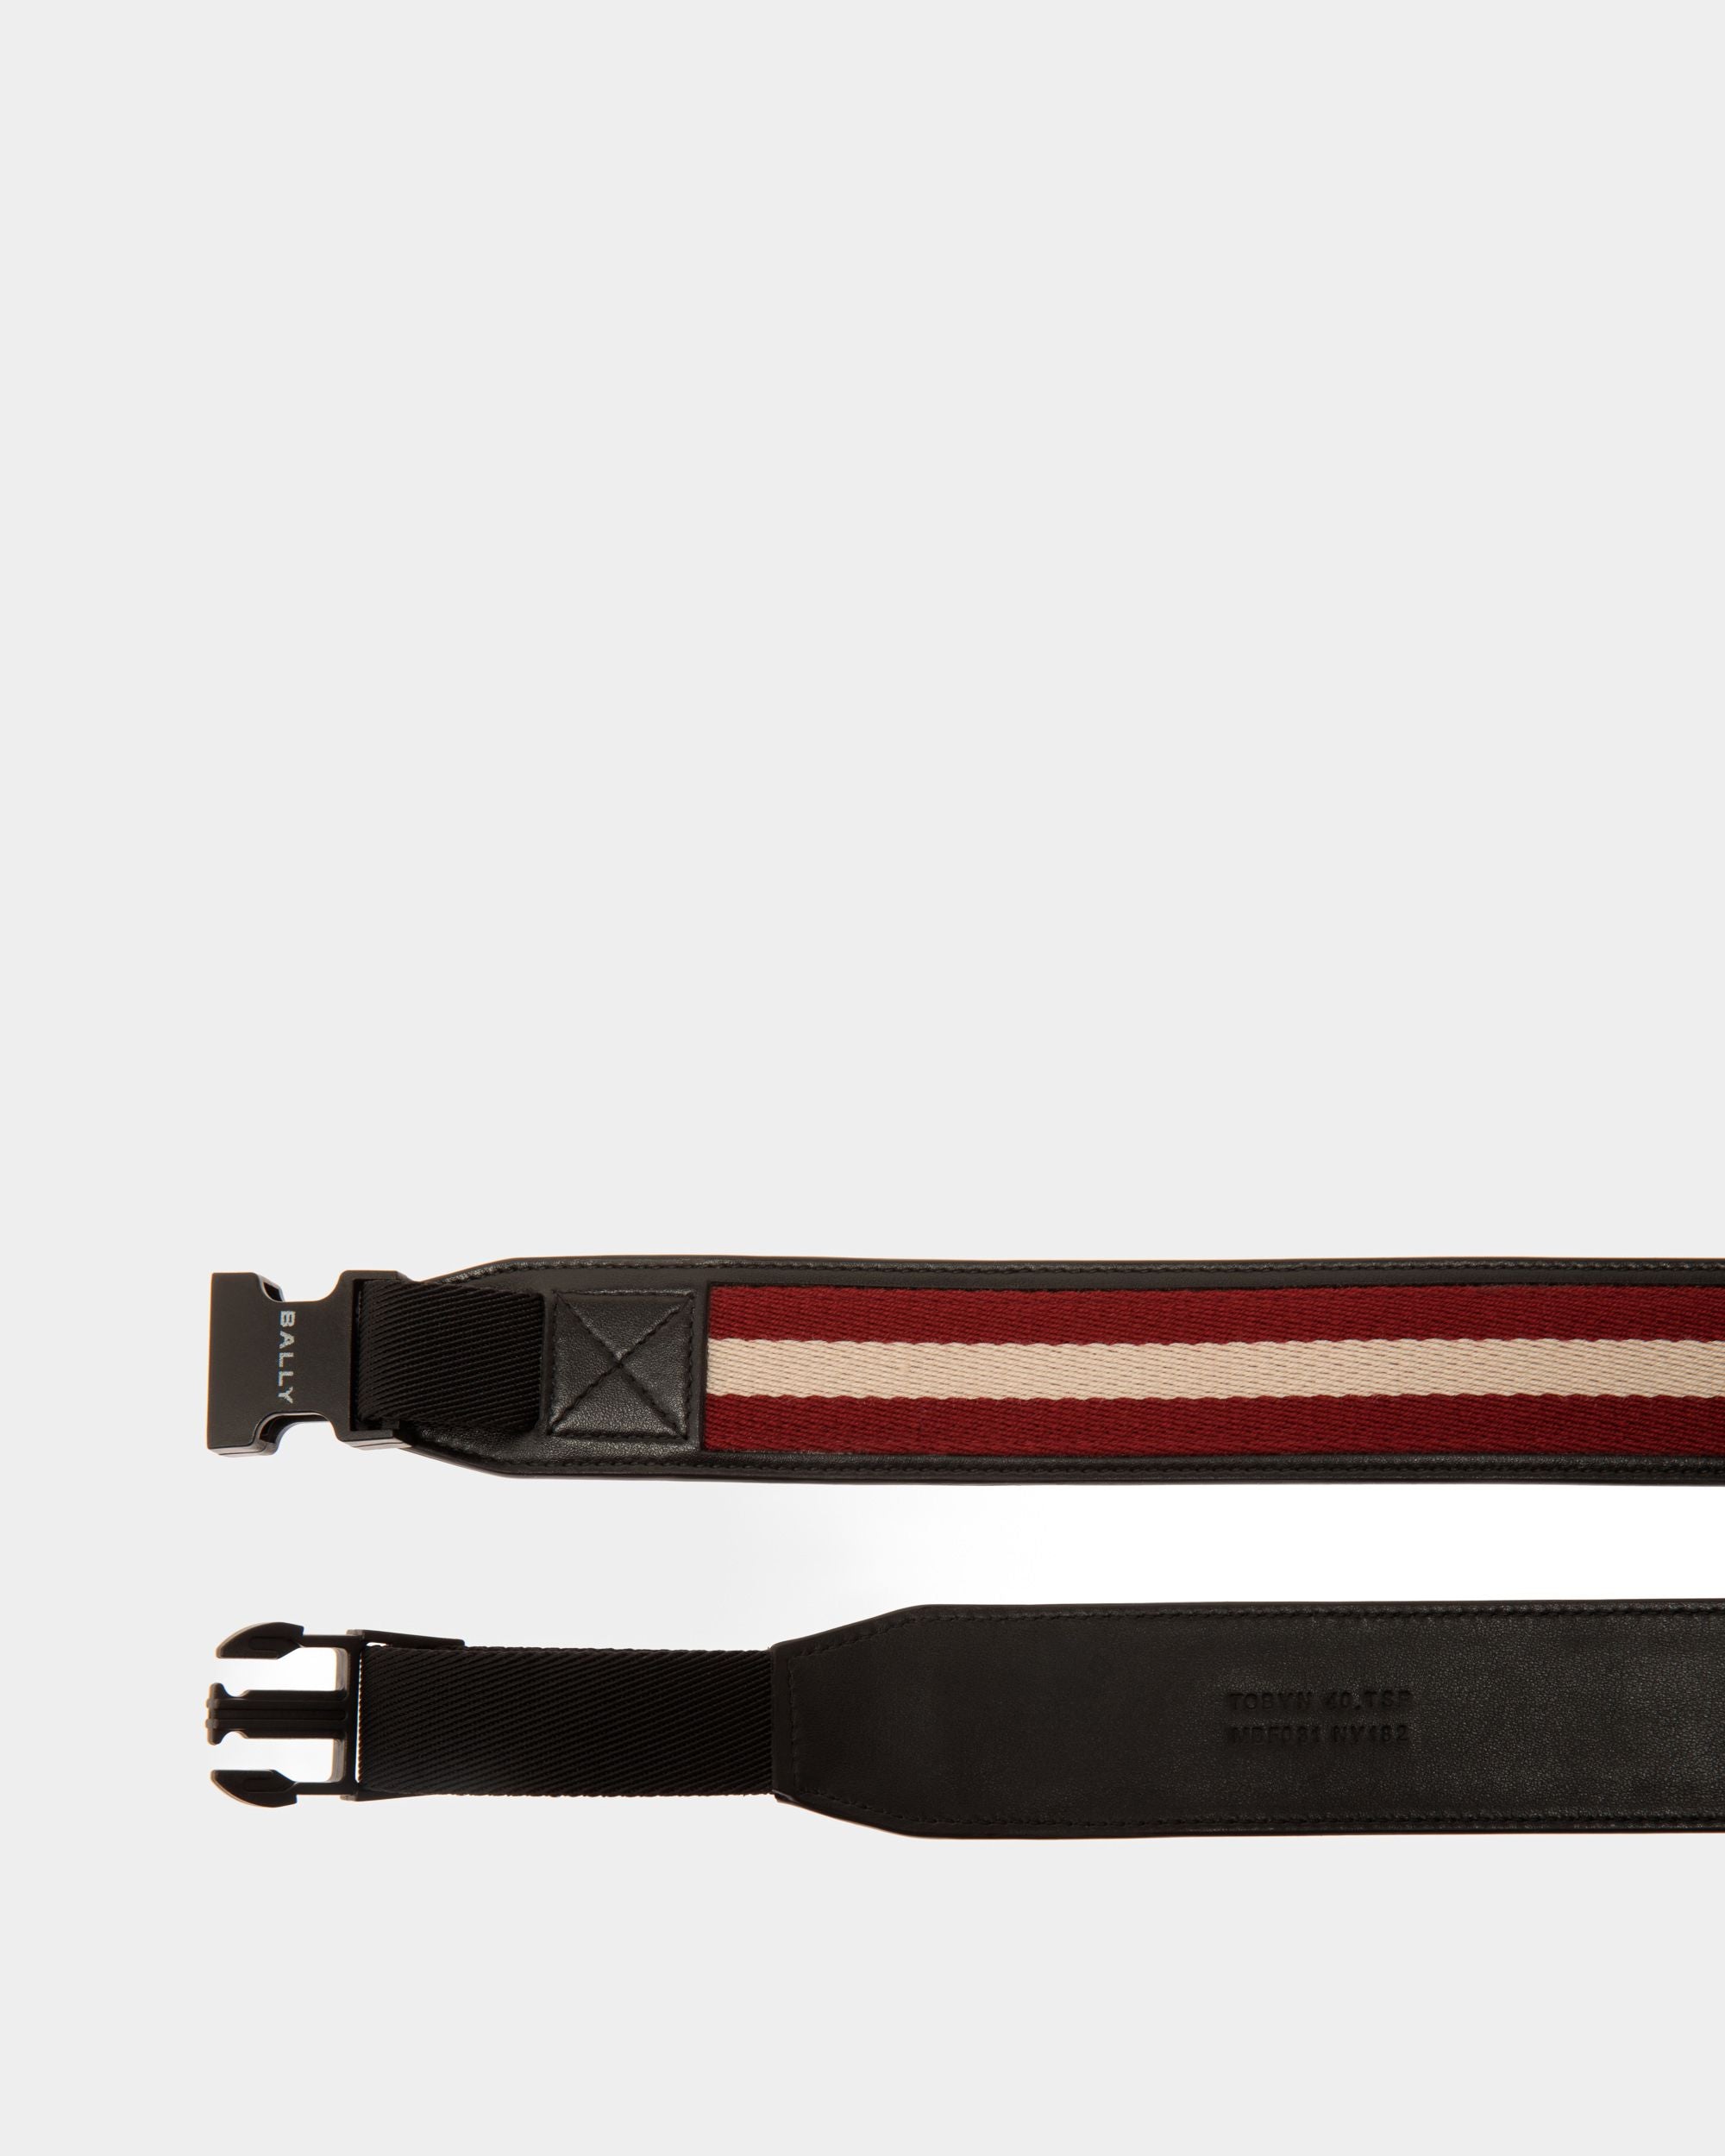 Tobyn 40mm | Men's Belt in Red, White and Black Fabric and Leather | Bally | Still Life Detail